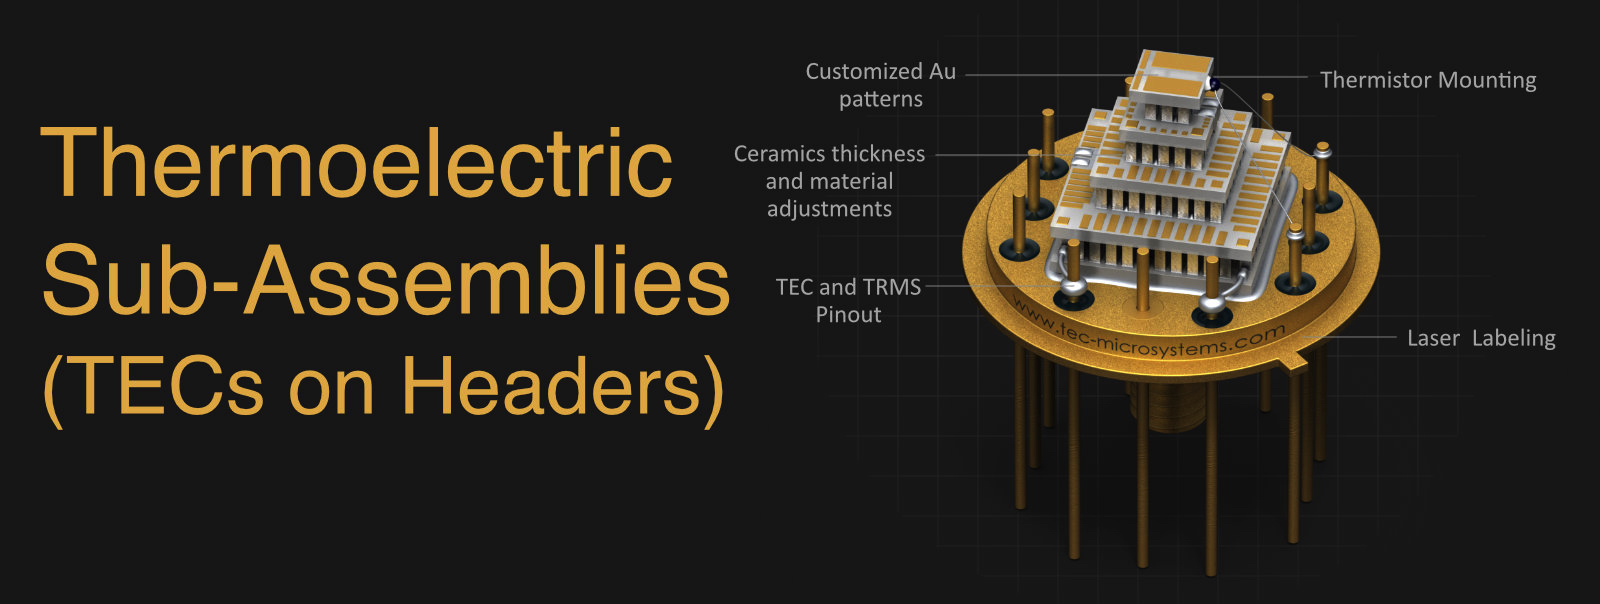 Thermoelectric assemblies - TE coolers mounted on standard headers with thermistors and additional application-specific modifications.